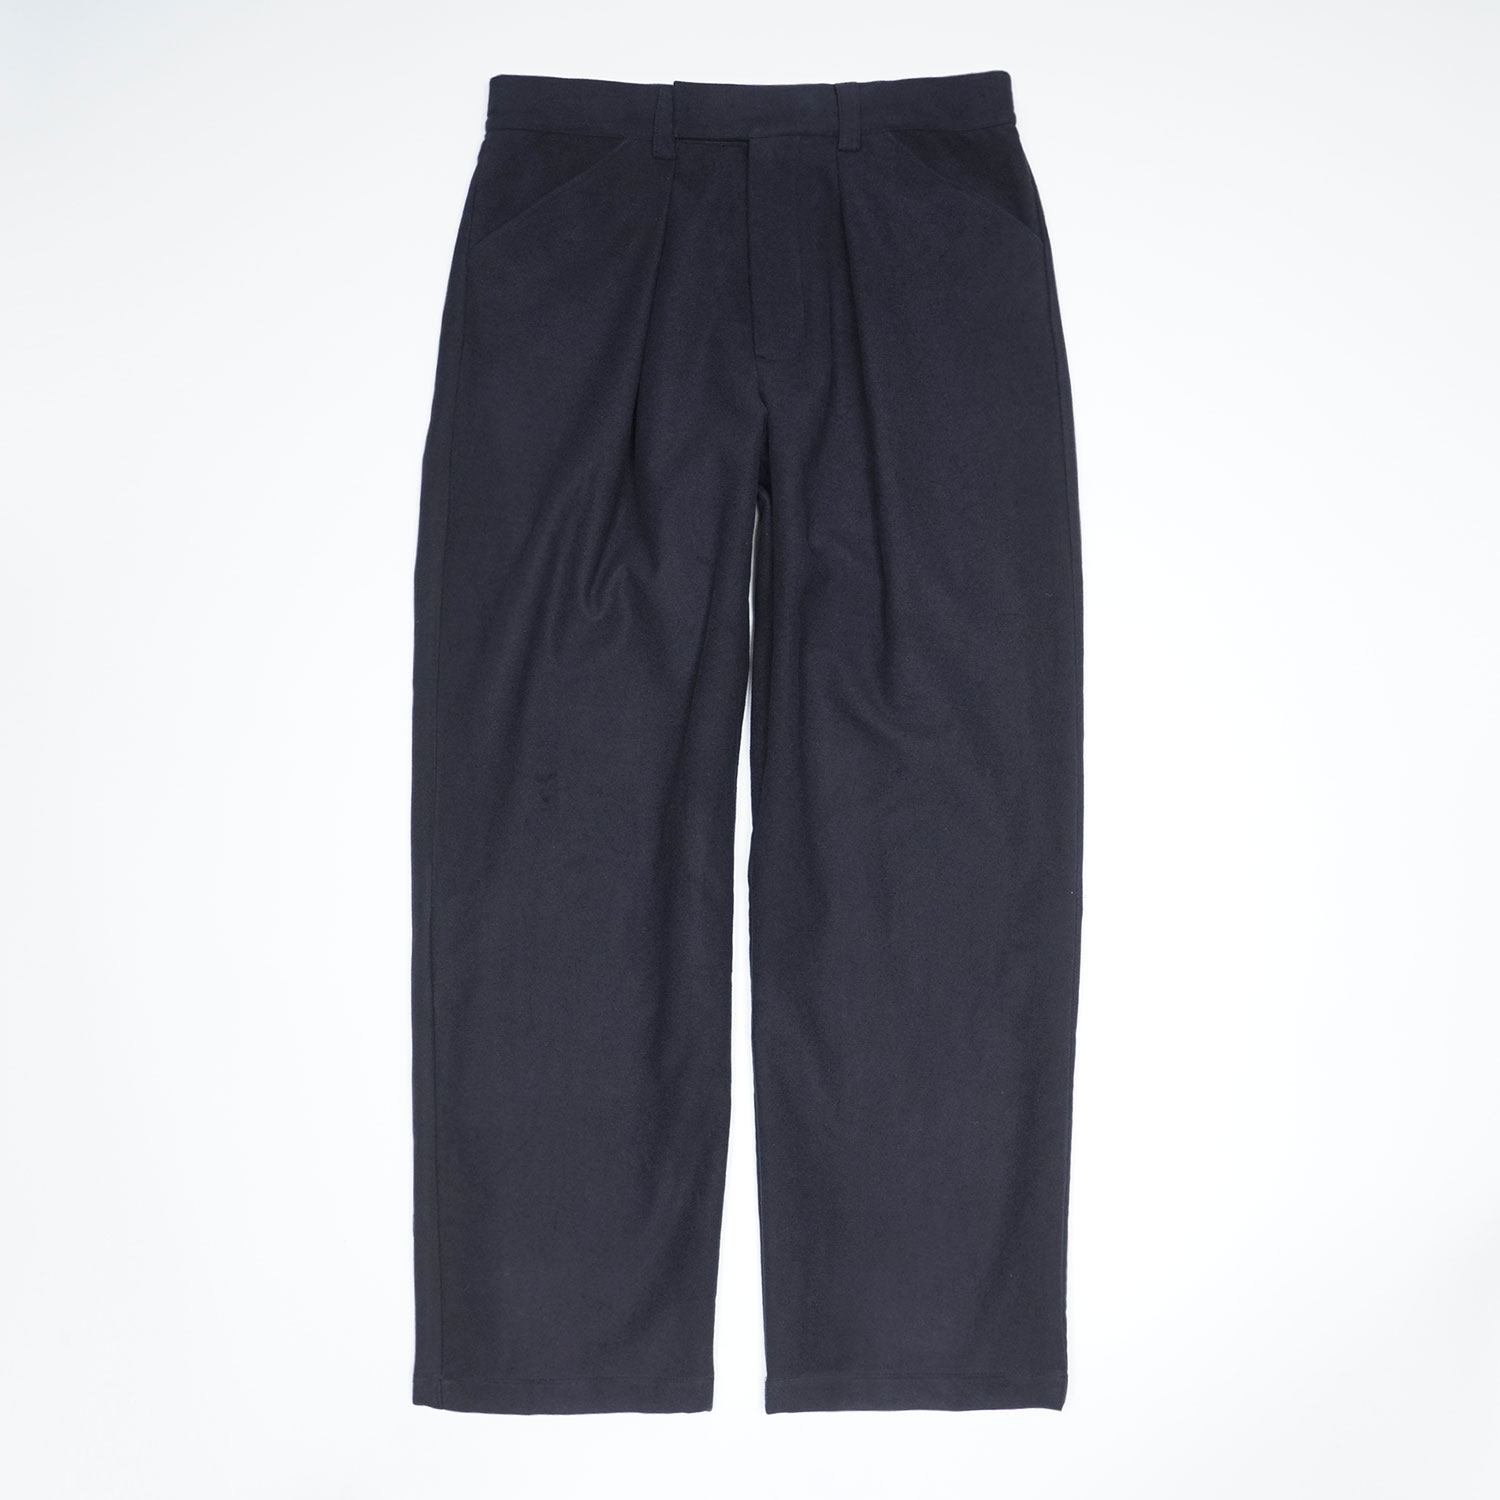 CHINO Pants in Midnight blue color by Arpenteur